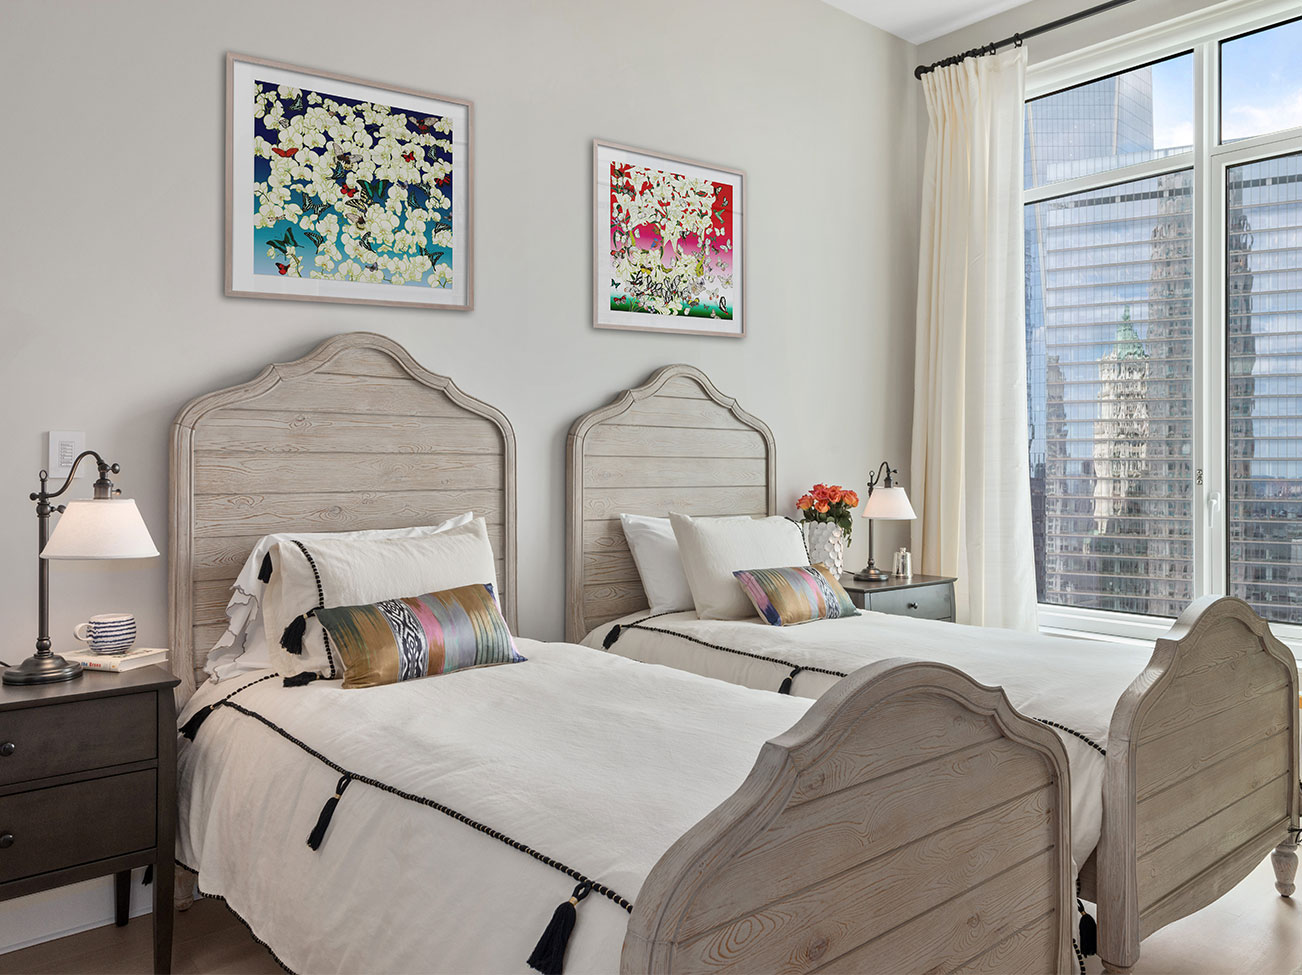 Bedroom with twin beds artwork over headboards, pale gray walls, city view through sheer shades and white curtains.